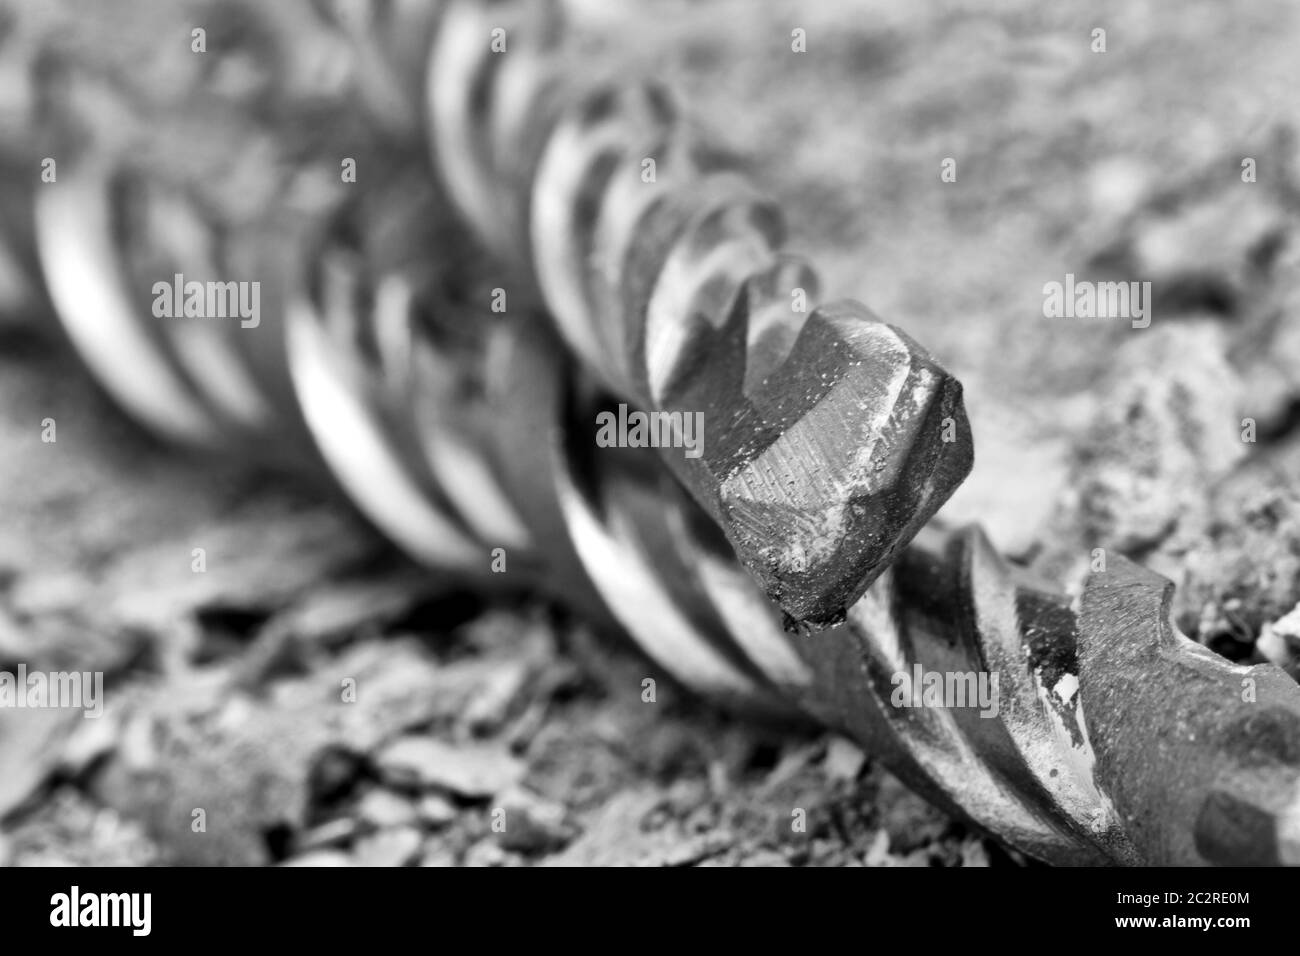 Industrial drills on cracked concrete. Close-up view Stock Photo